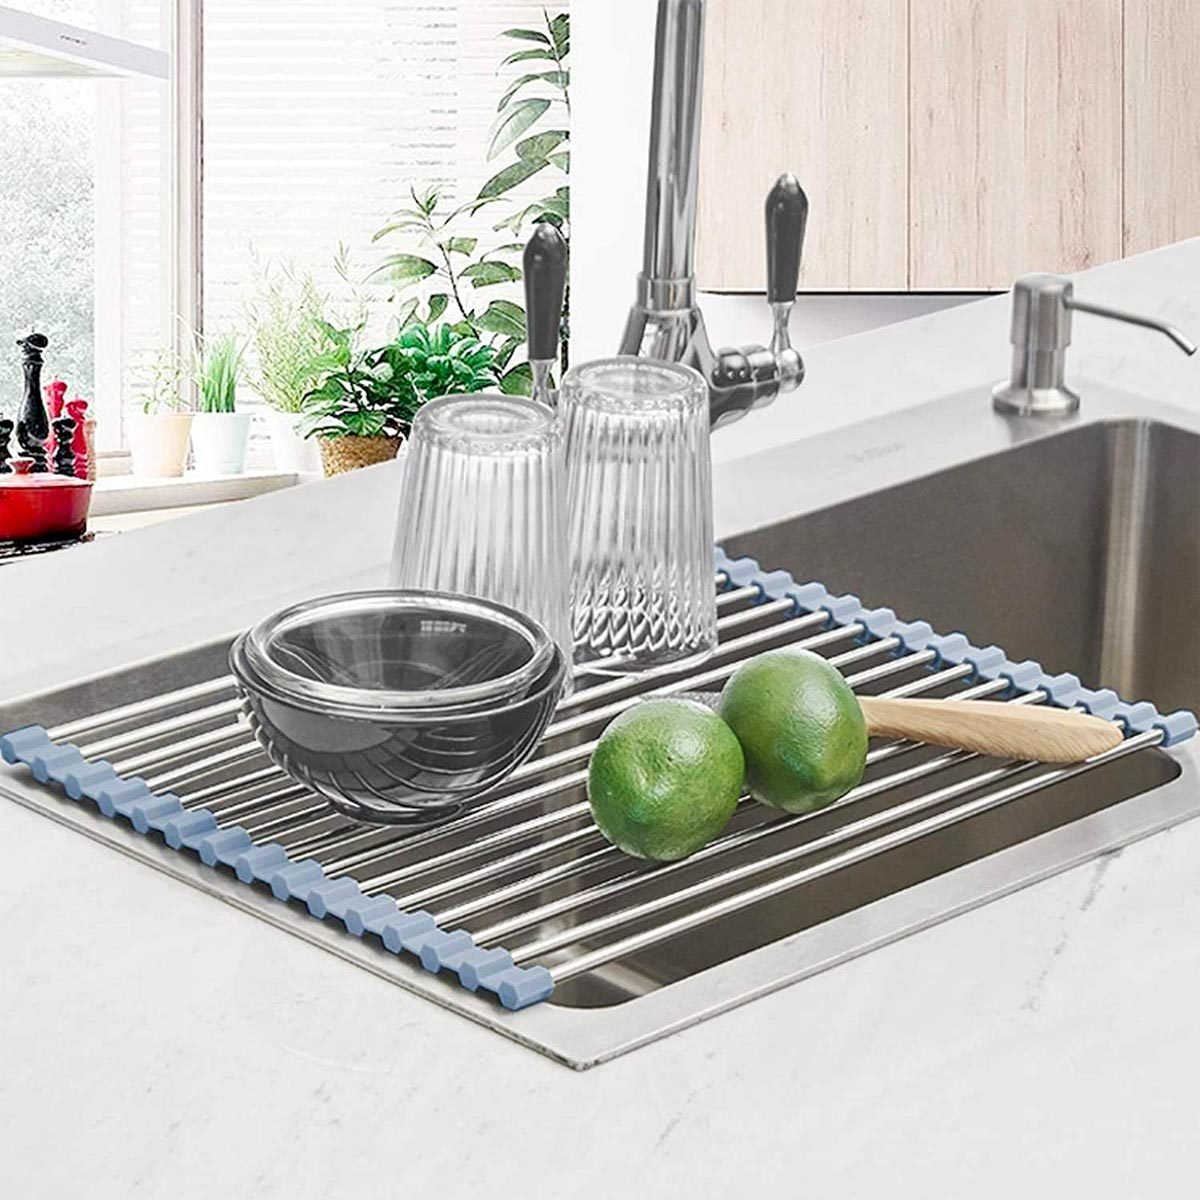 Dish drying rack small - Dish drying rack & mat - Sink side - Kitchen &  cooking